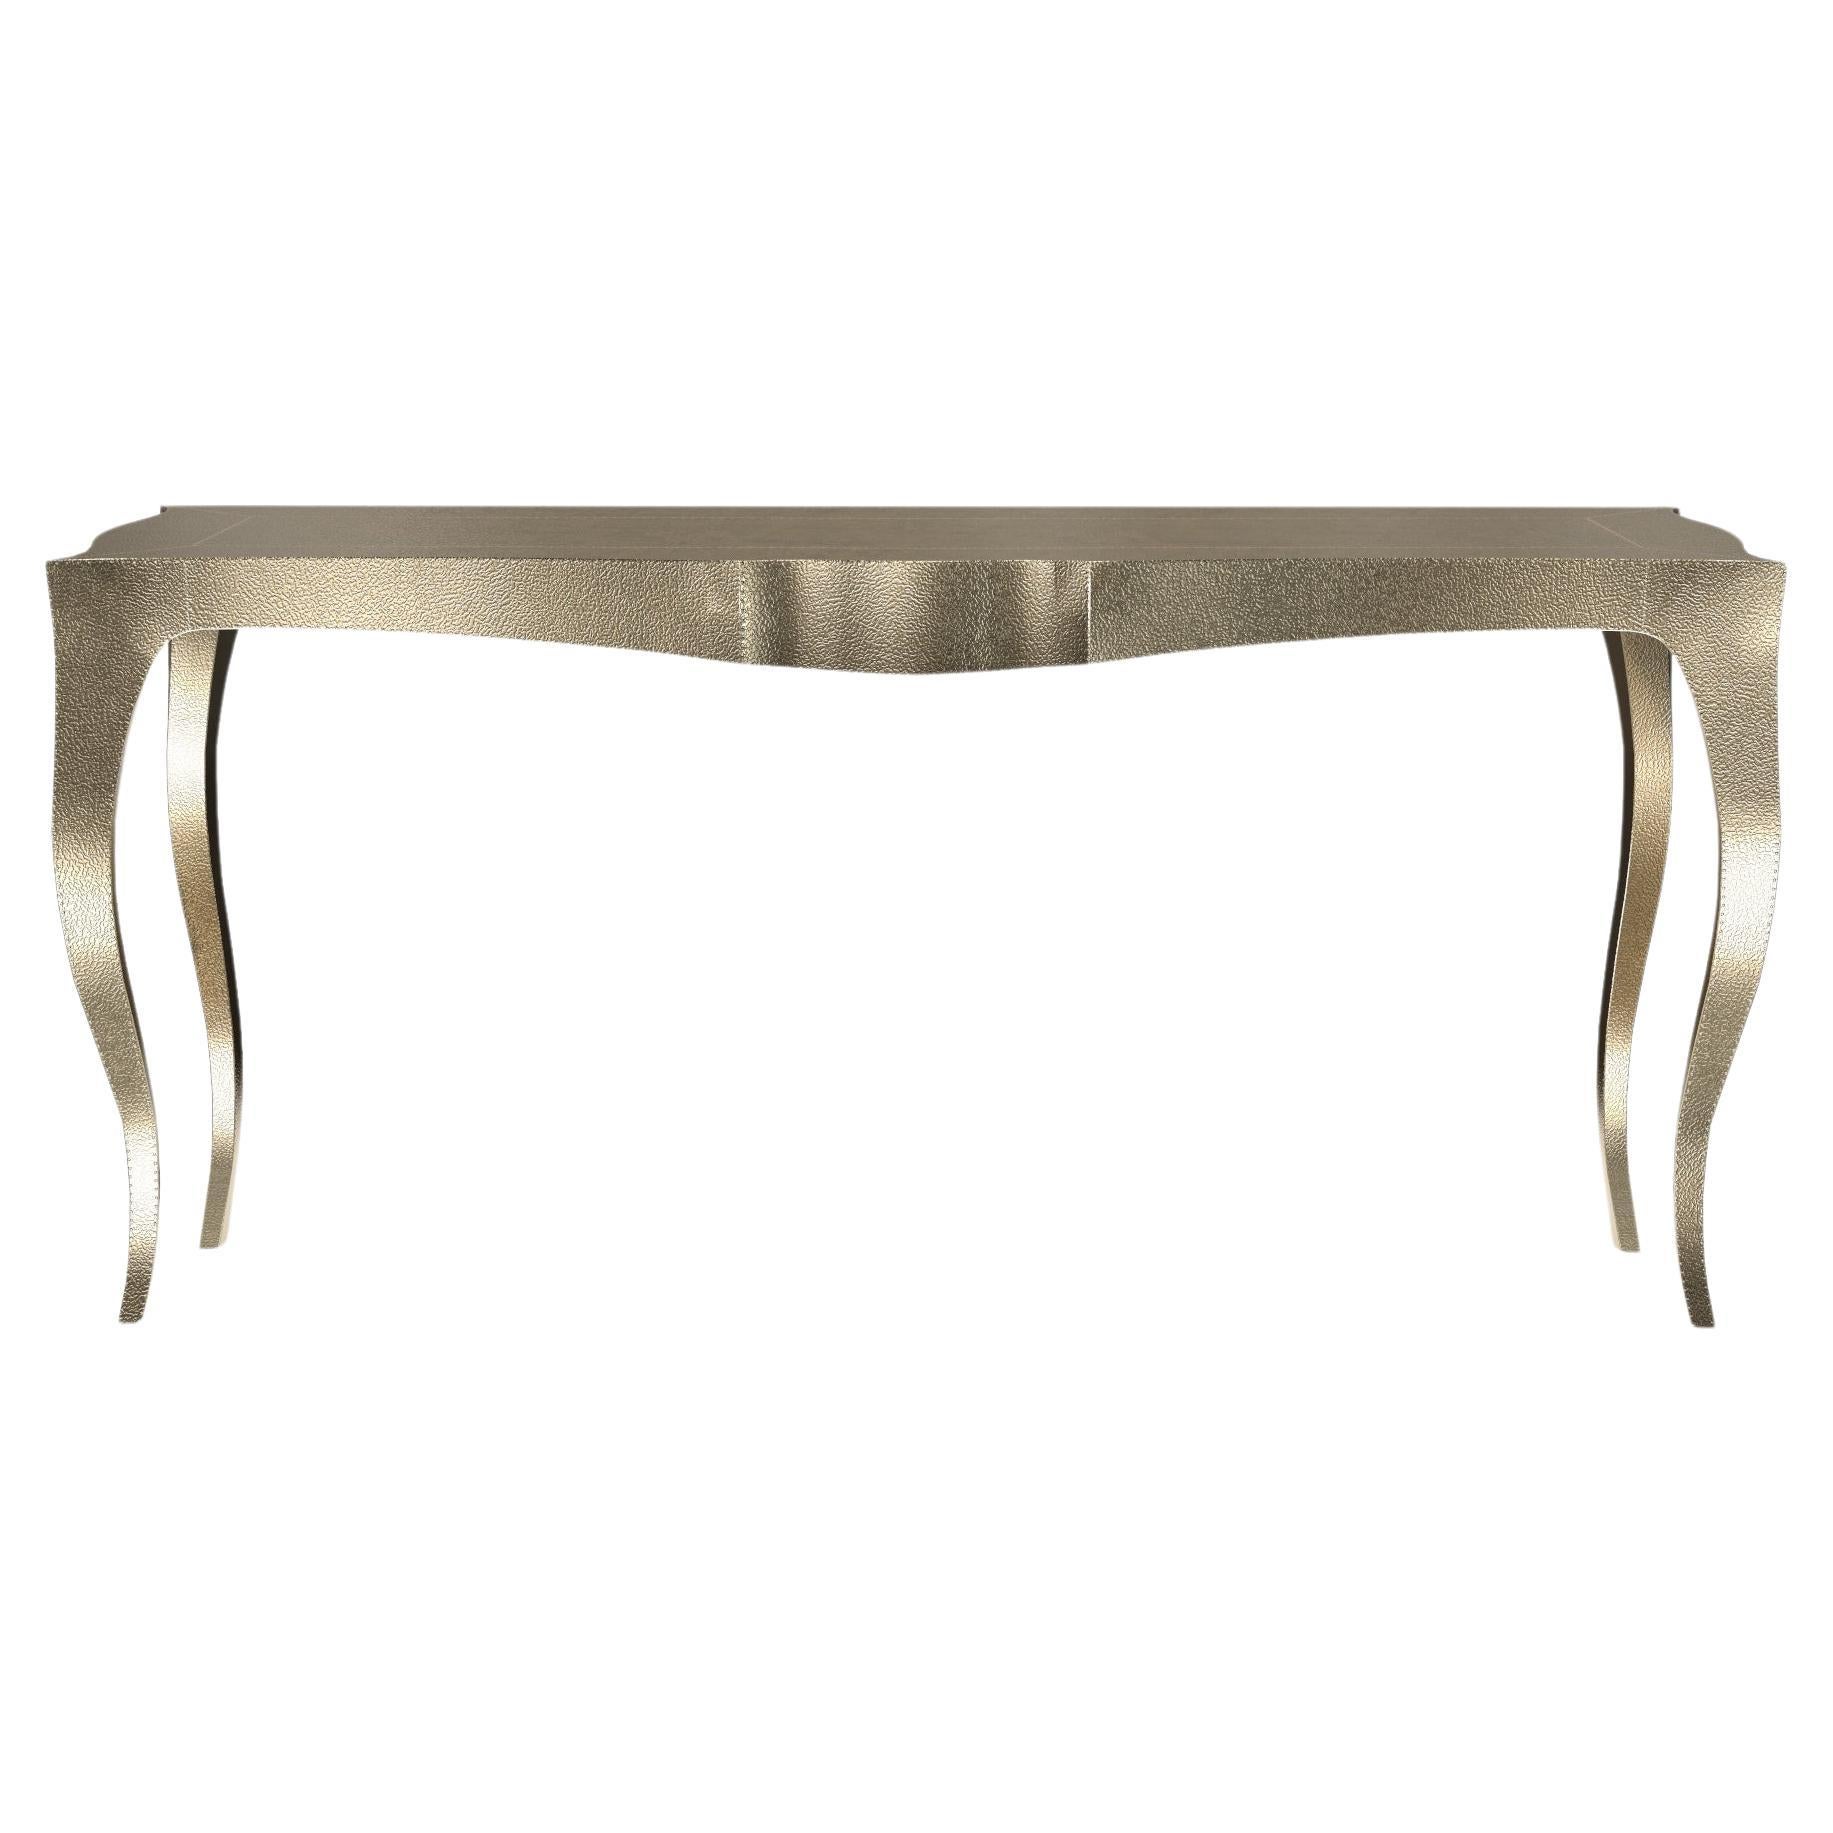 Louise Console Art Deco Nesting Tables and Stacking Tables Fine Hammered Brass